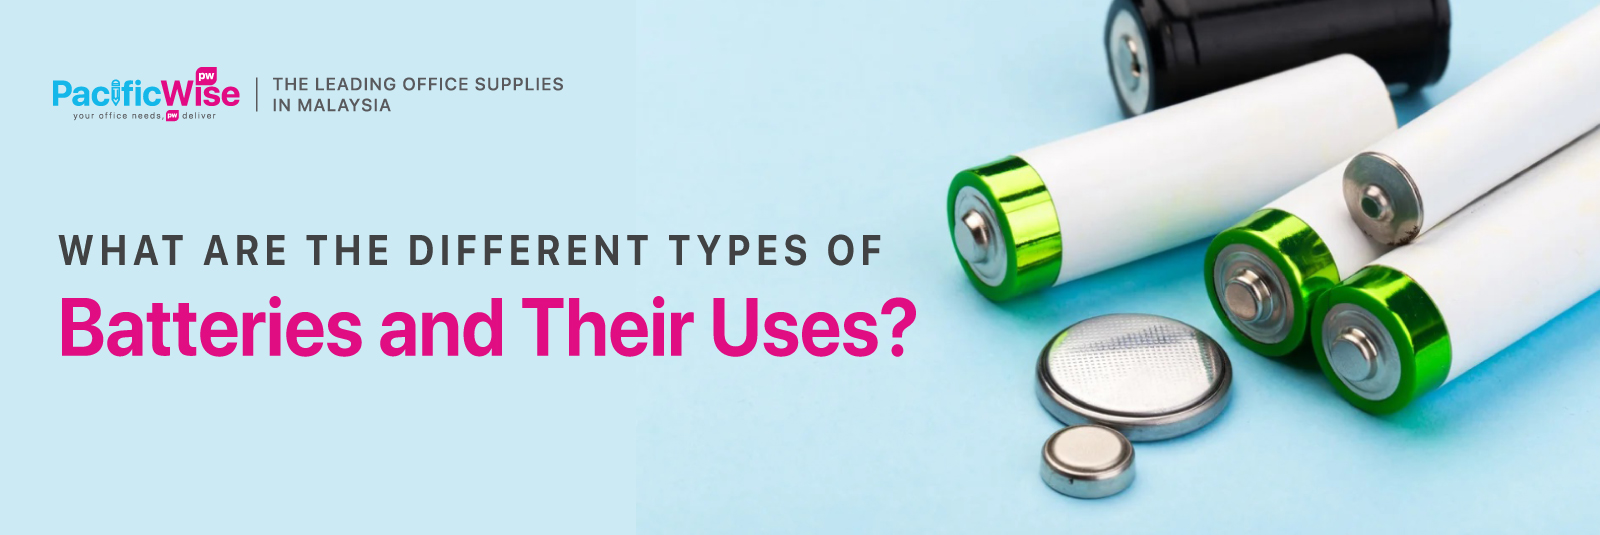 what are the different types of batteries and their uses